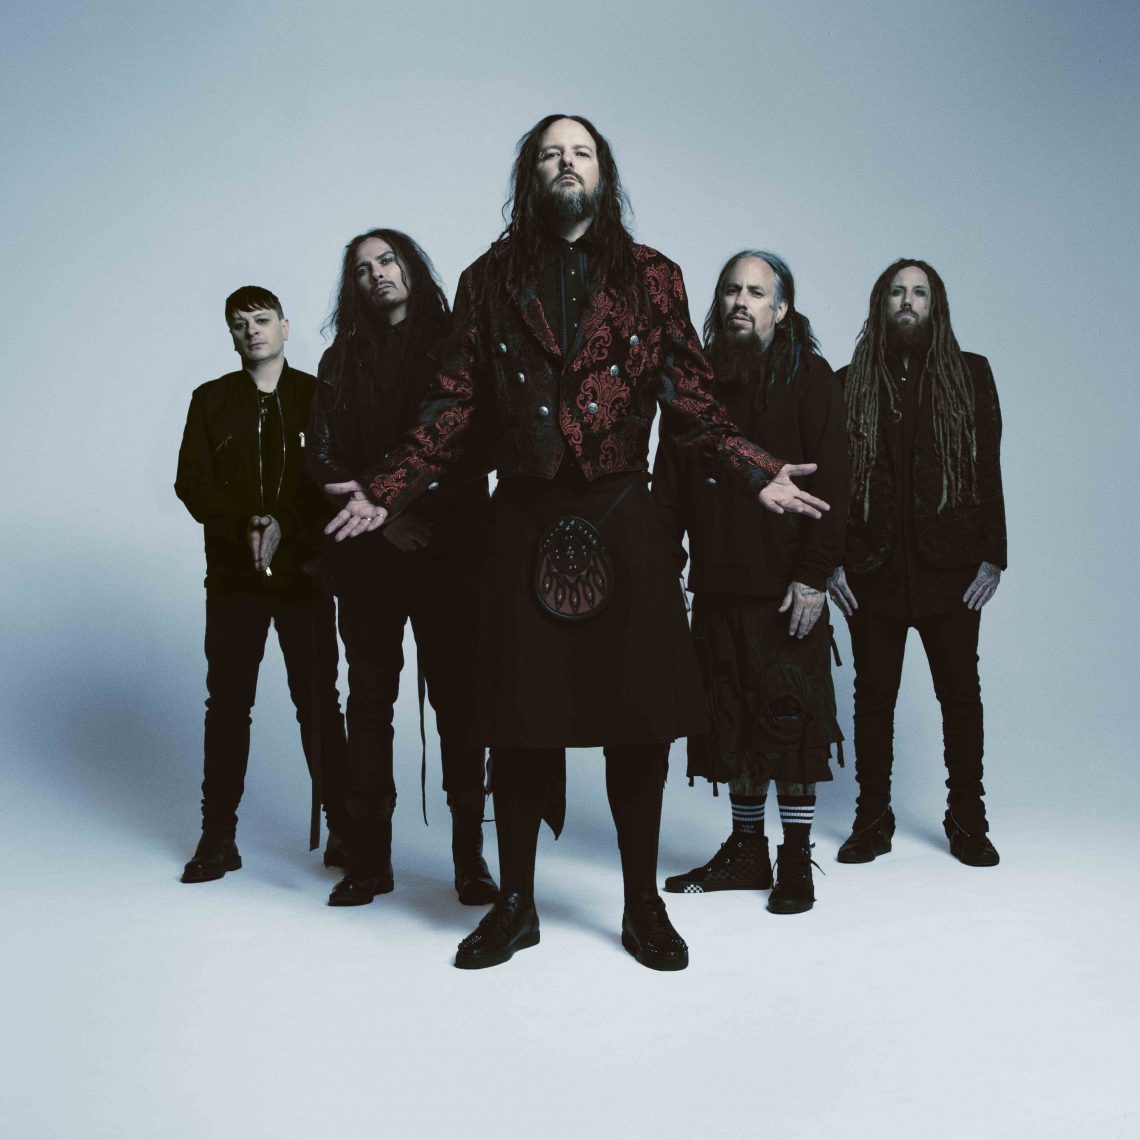 Korn, The Nothing  – A Review